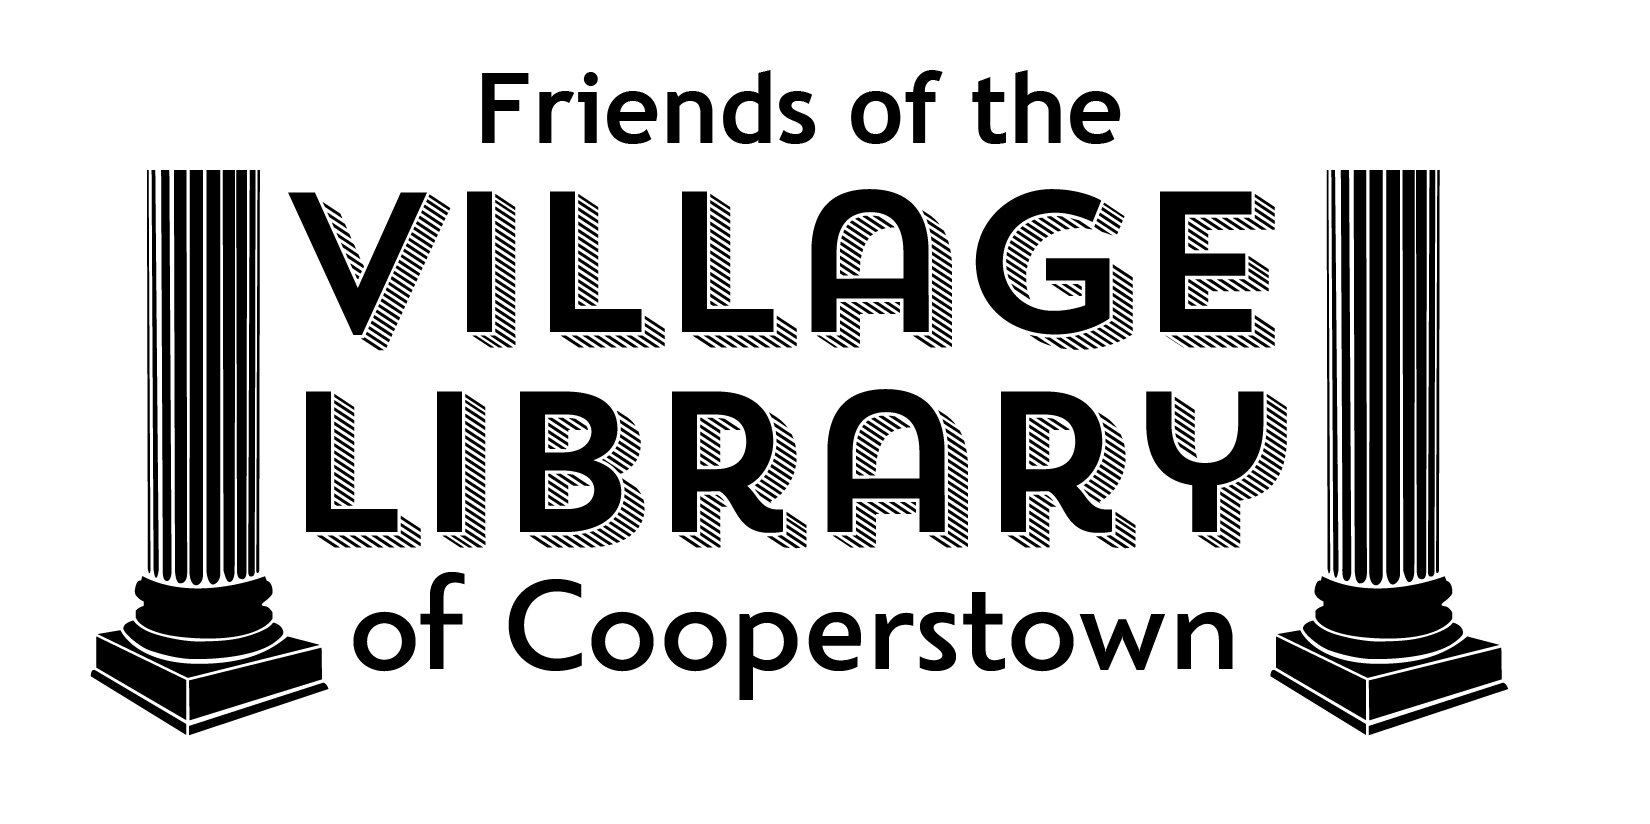 Friends of the Villiage Library final logos-01.jpg